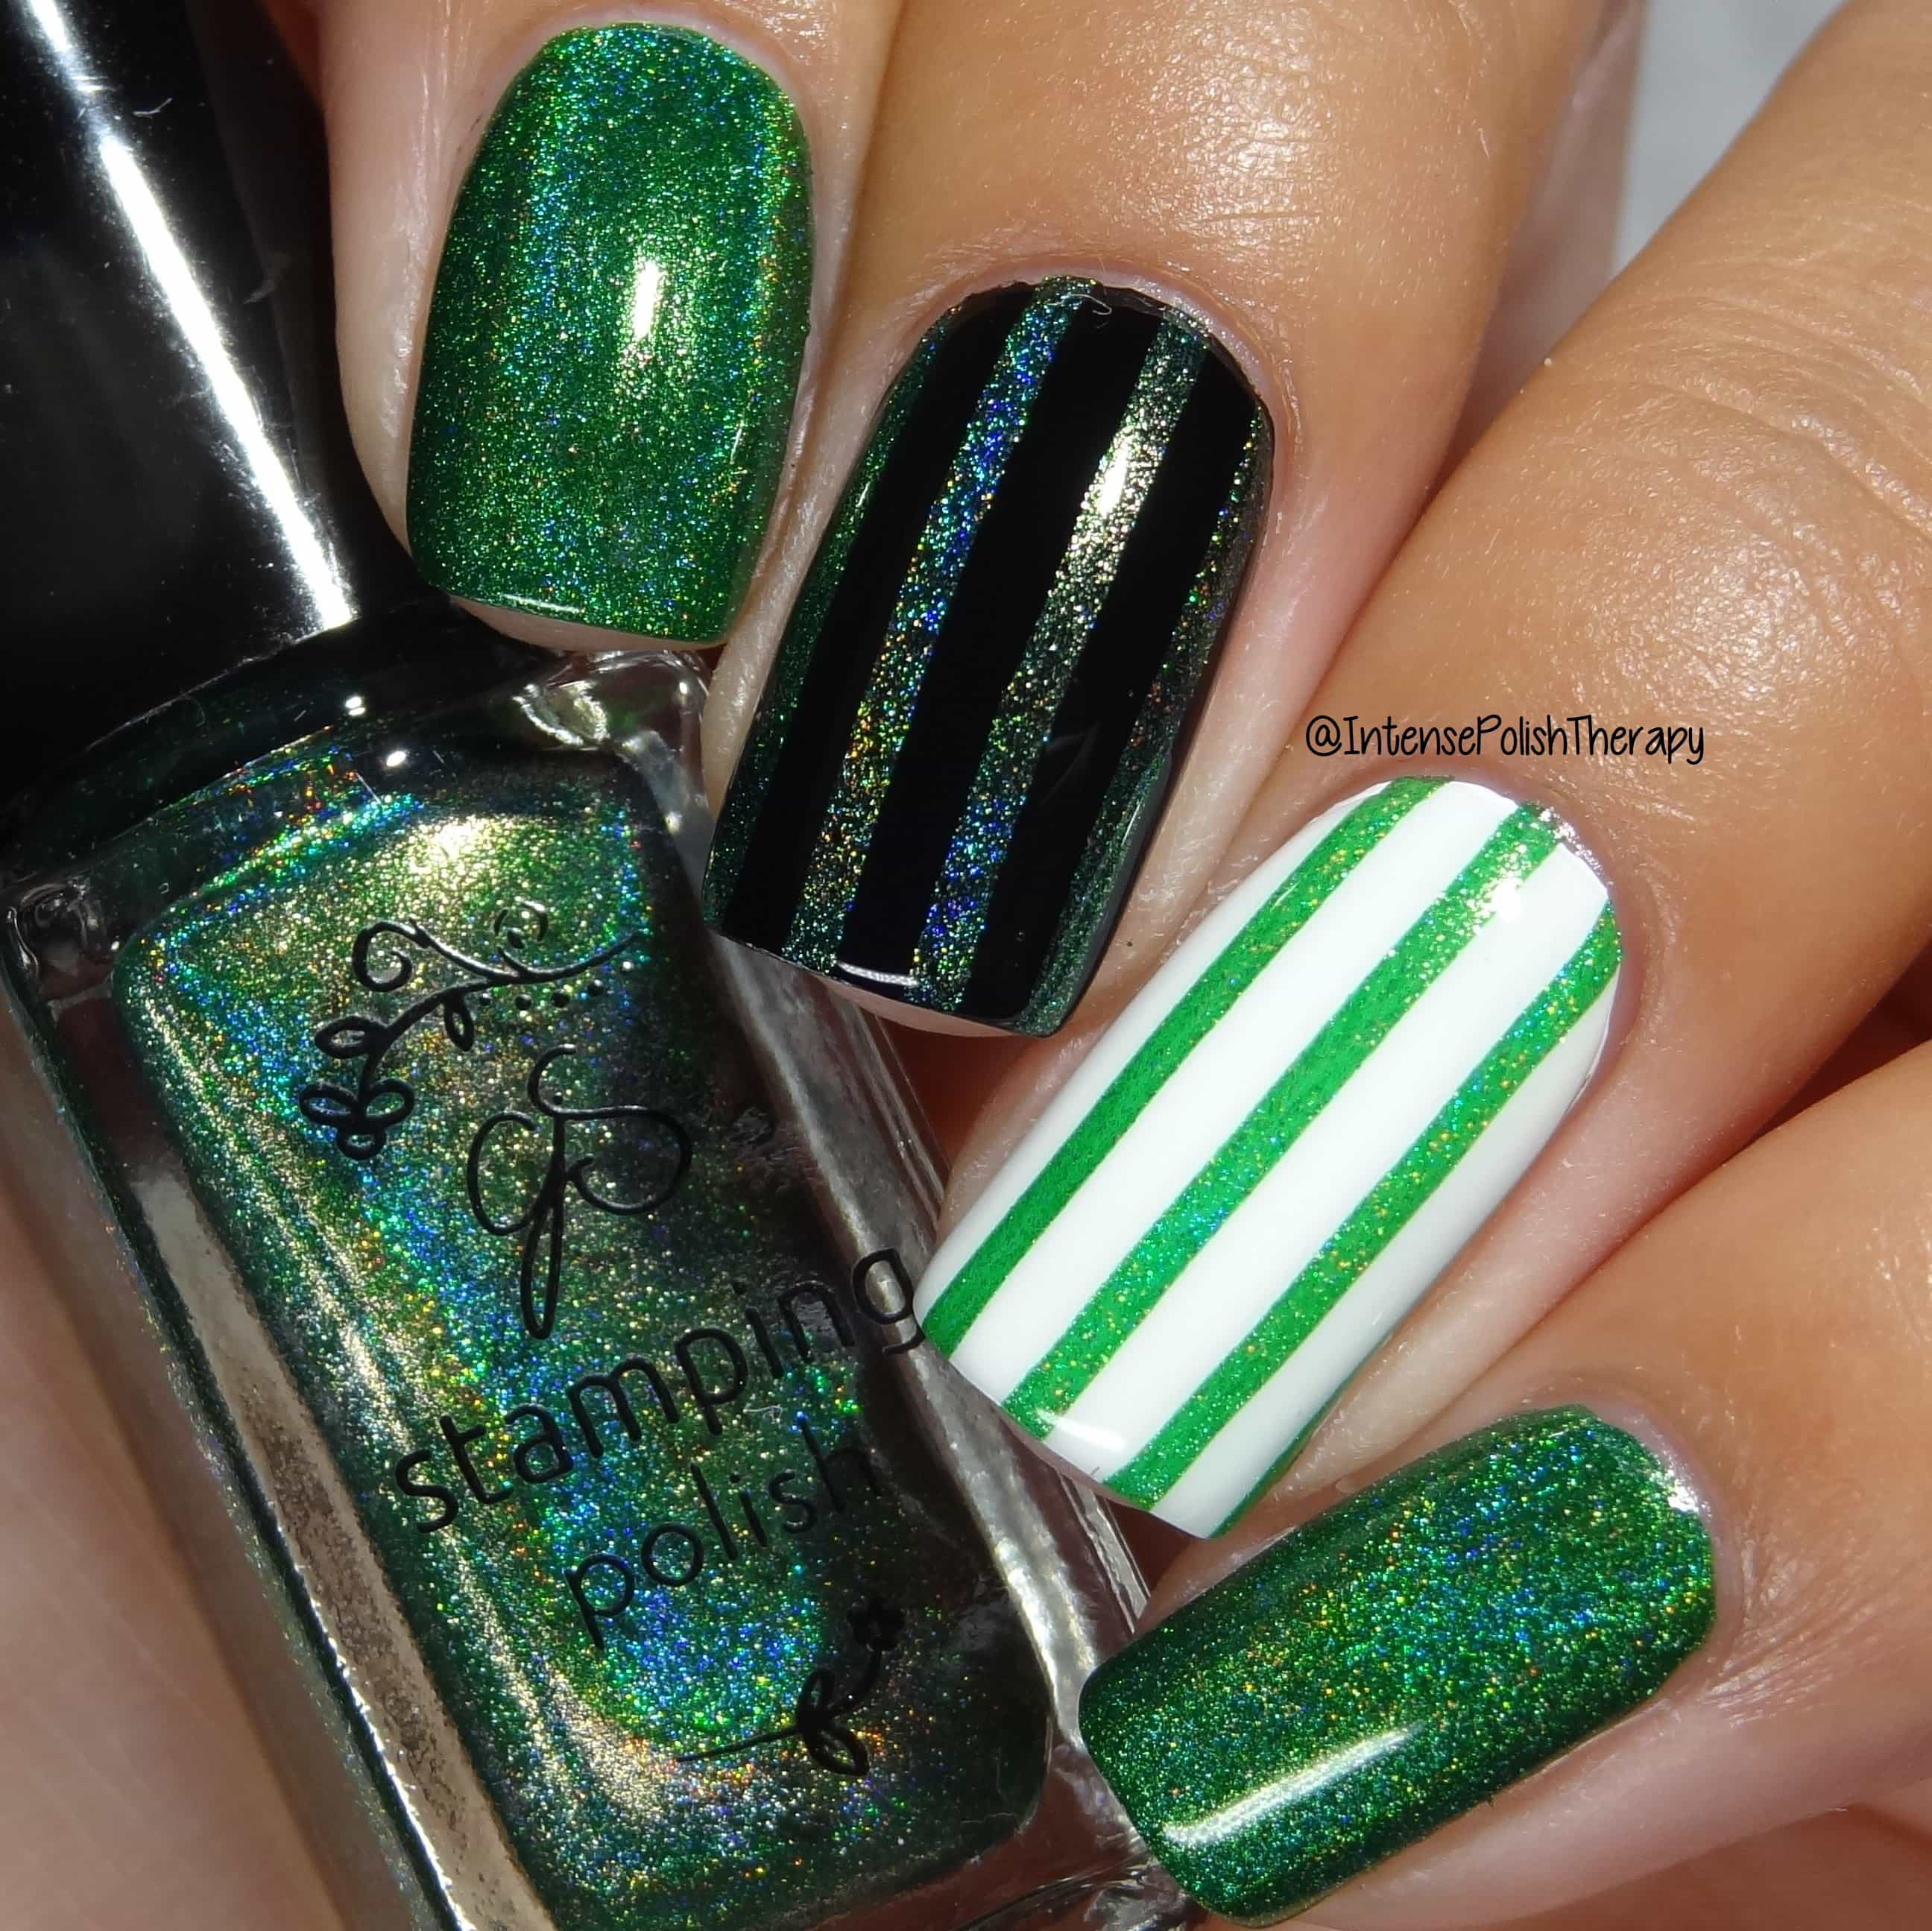 Clear Jelly Stamper Polish - C3001H Emerald Isle - Creata Beauty - Professional Beauty Products